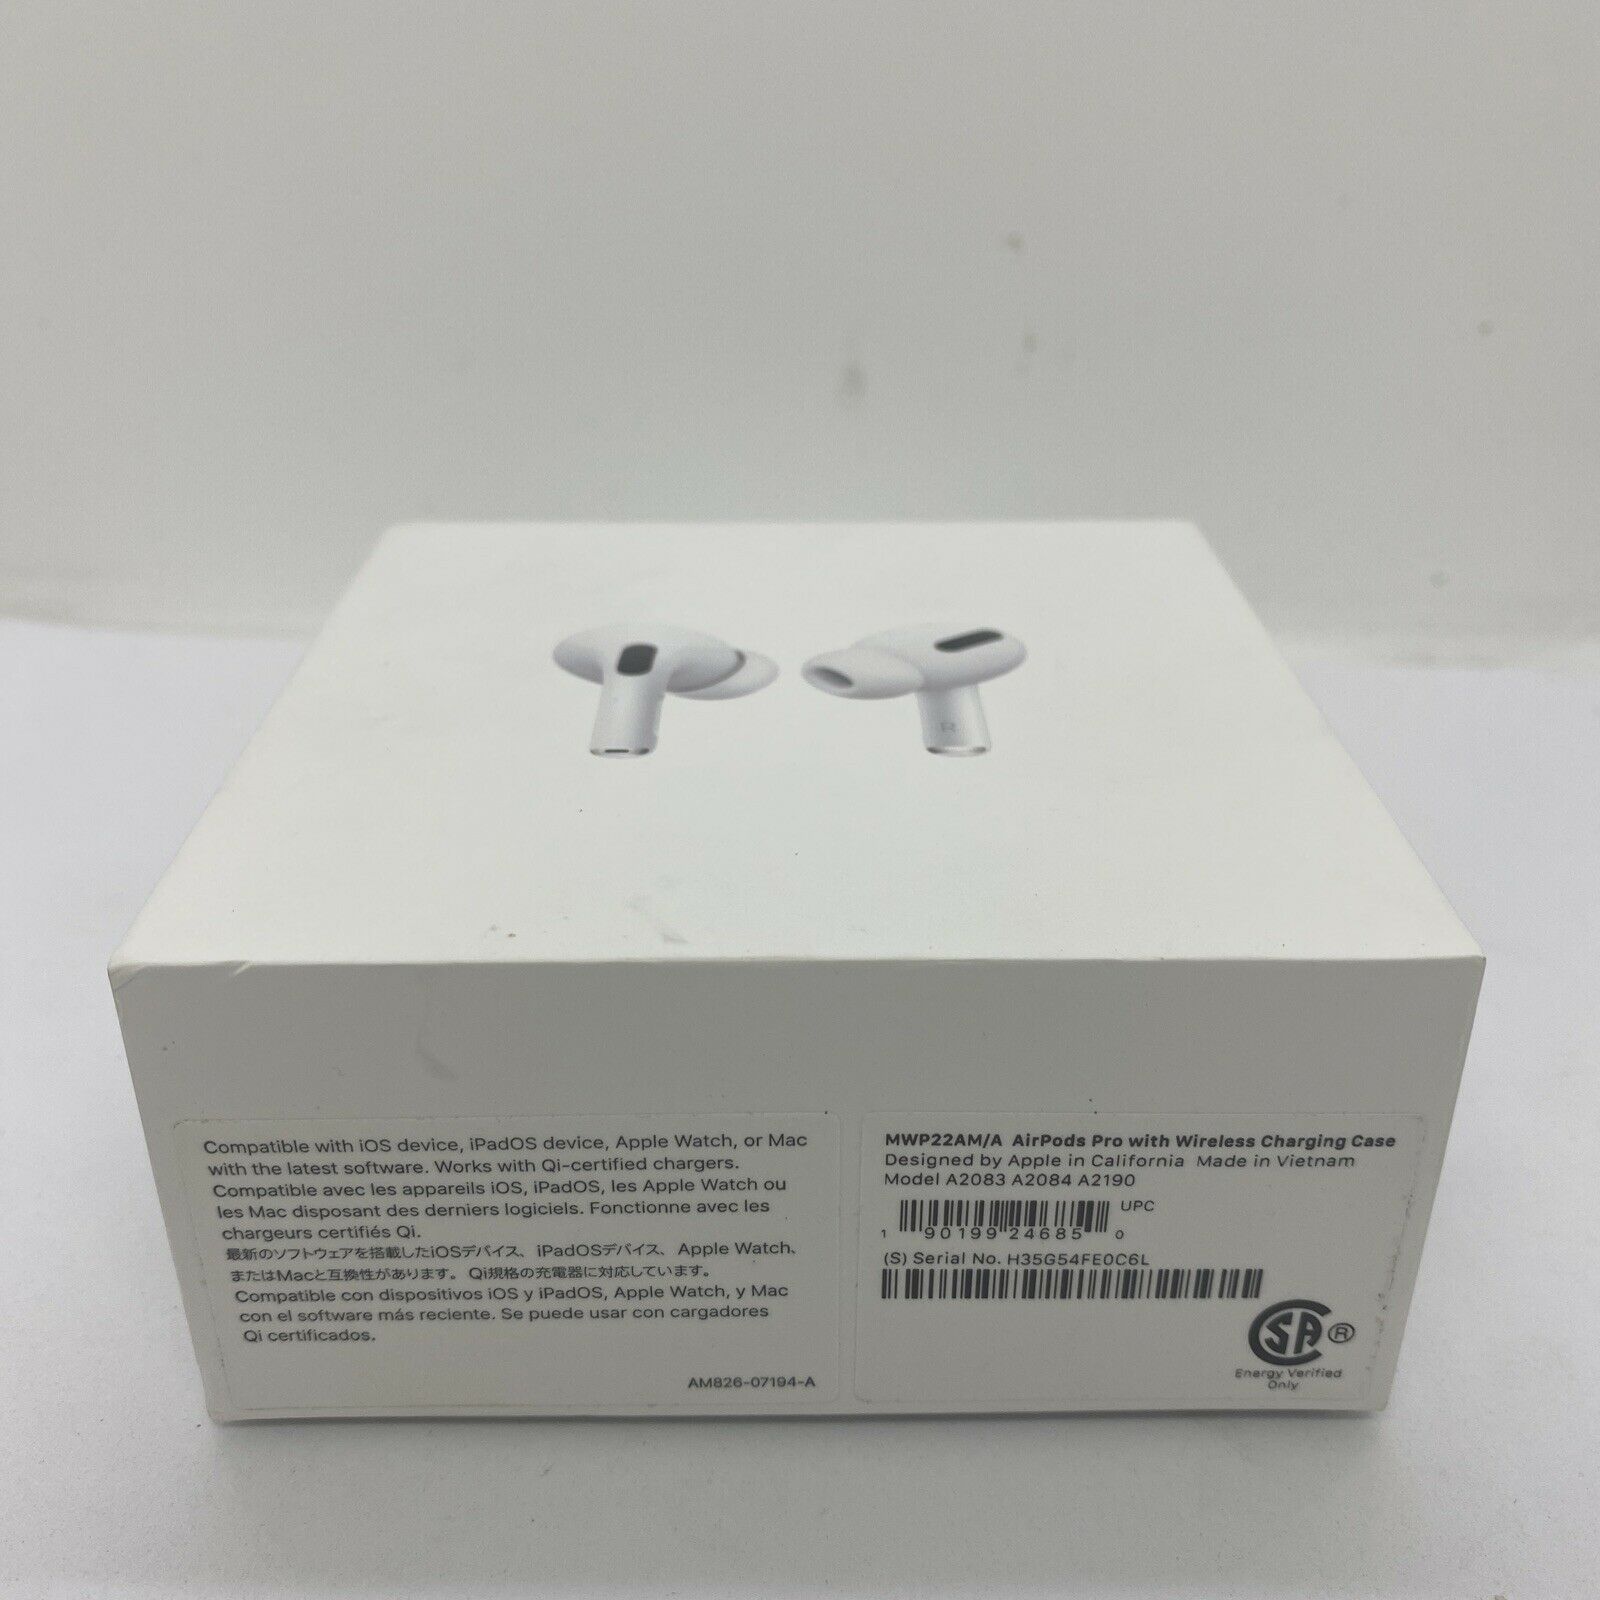 Apple AirPods Pro With Wireless Charging Case White - buy in bulk